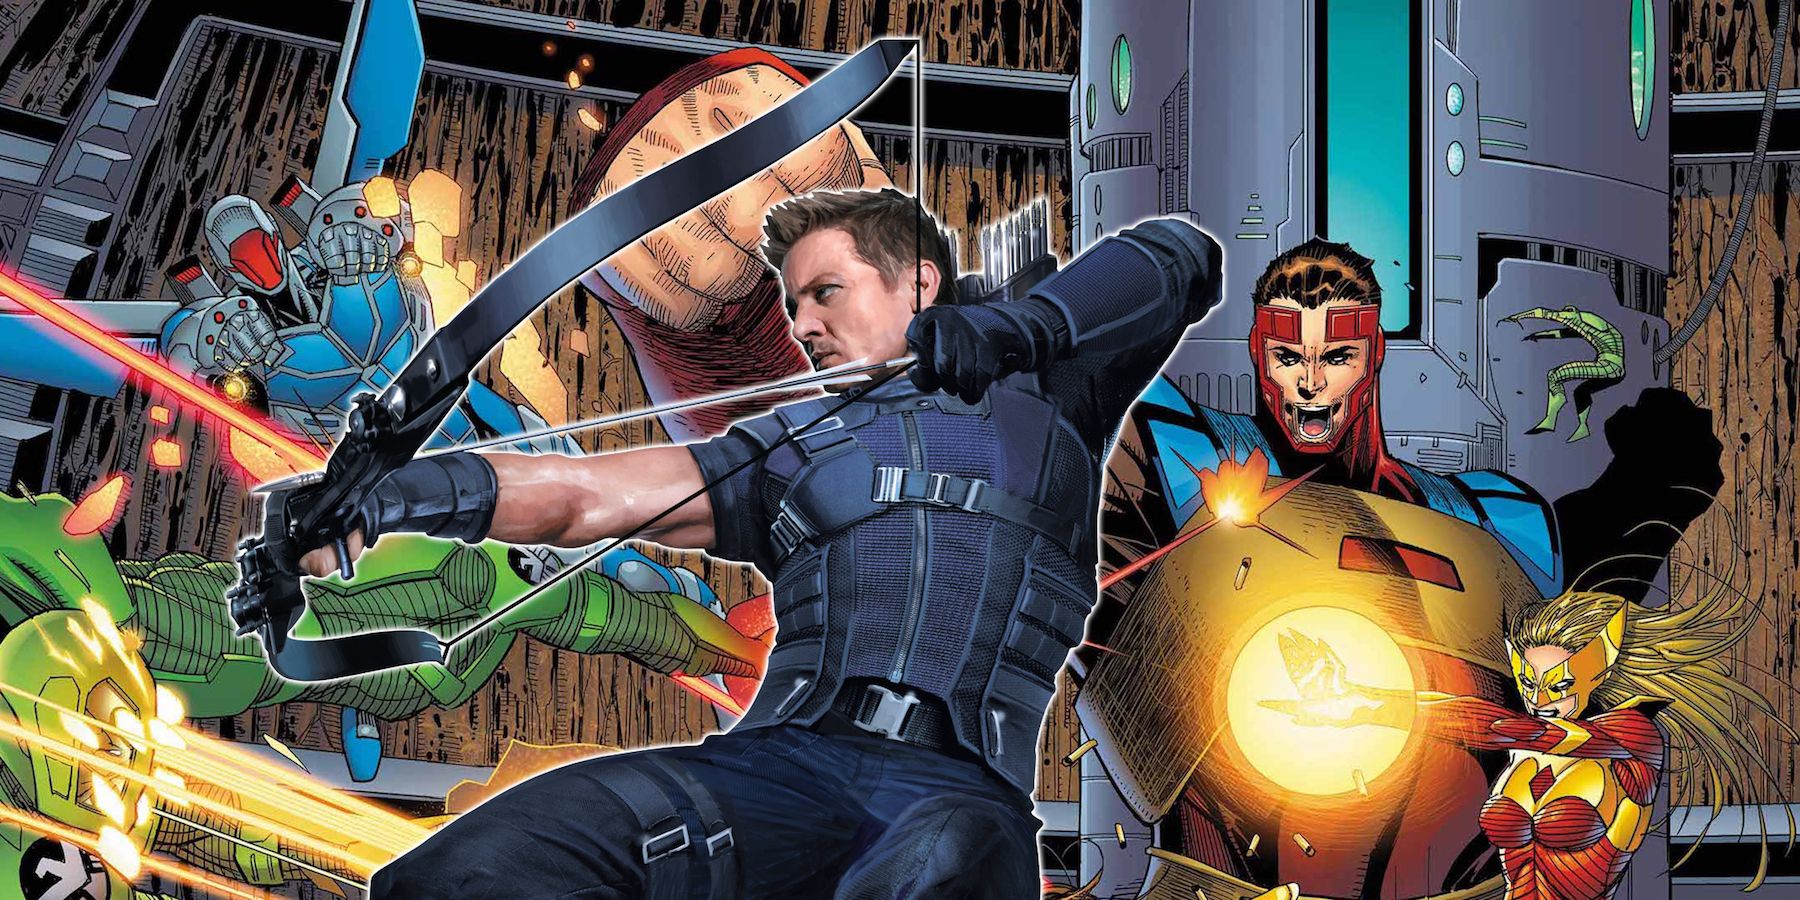 Hawkeye's Avengers 4 Arc Is The Perfect Time To Introduce Thunderbolts